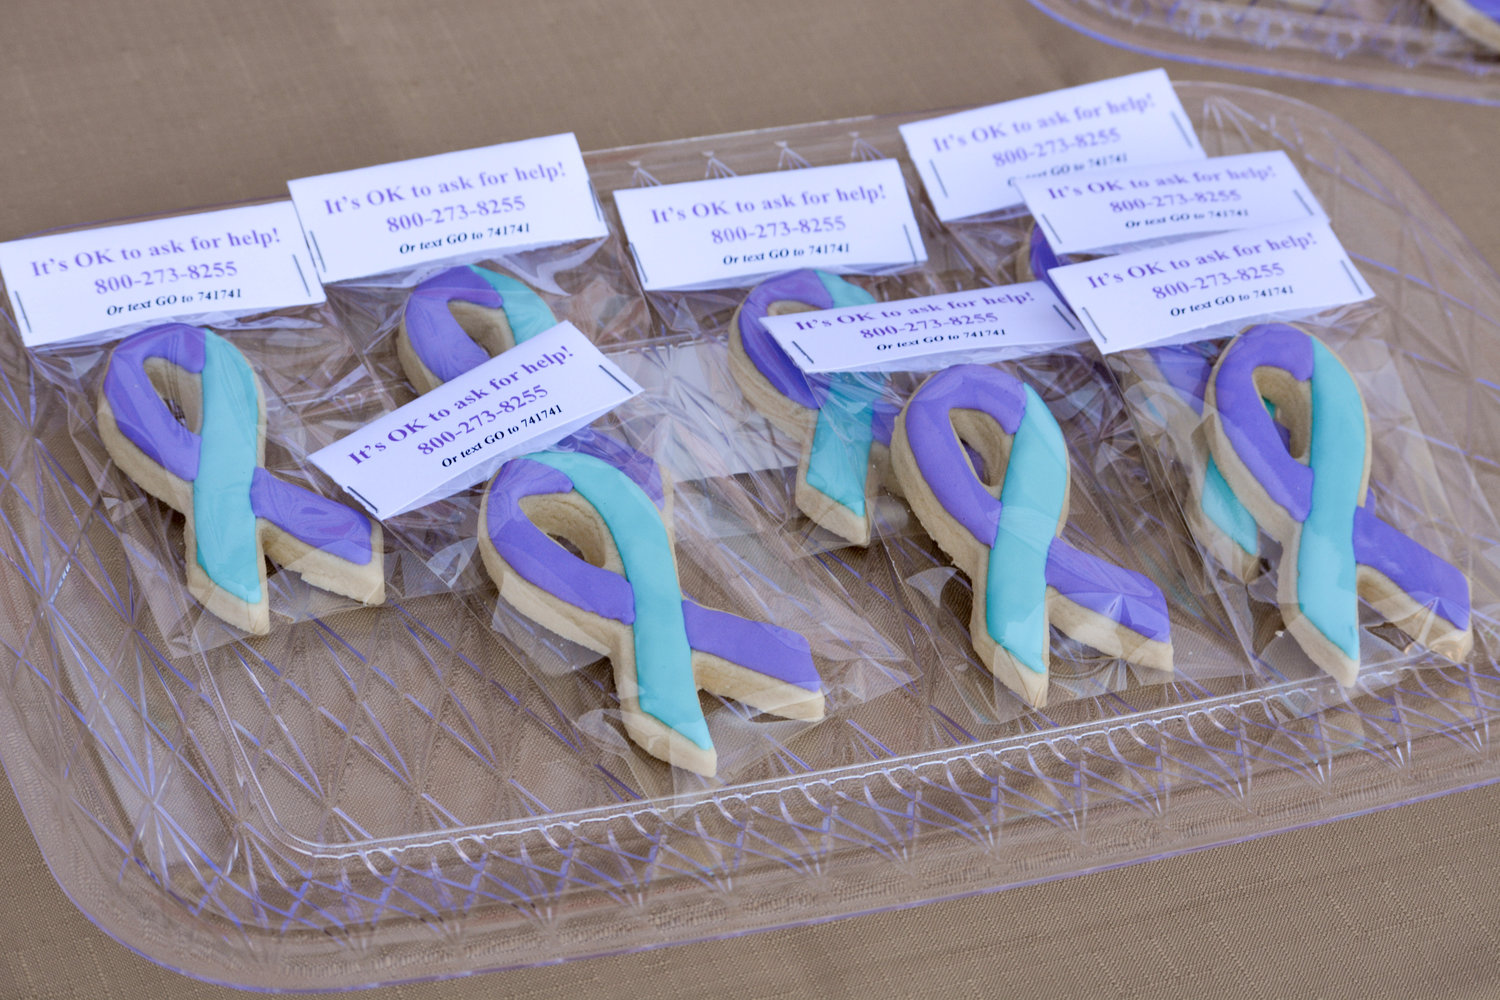 Cookies are displayed with an attached message of “It’s okay to ask for help,” at the Duggins Welcome Home event on Monday, Aug. 23 at the Hockinson Community Center.